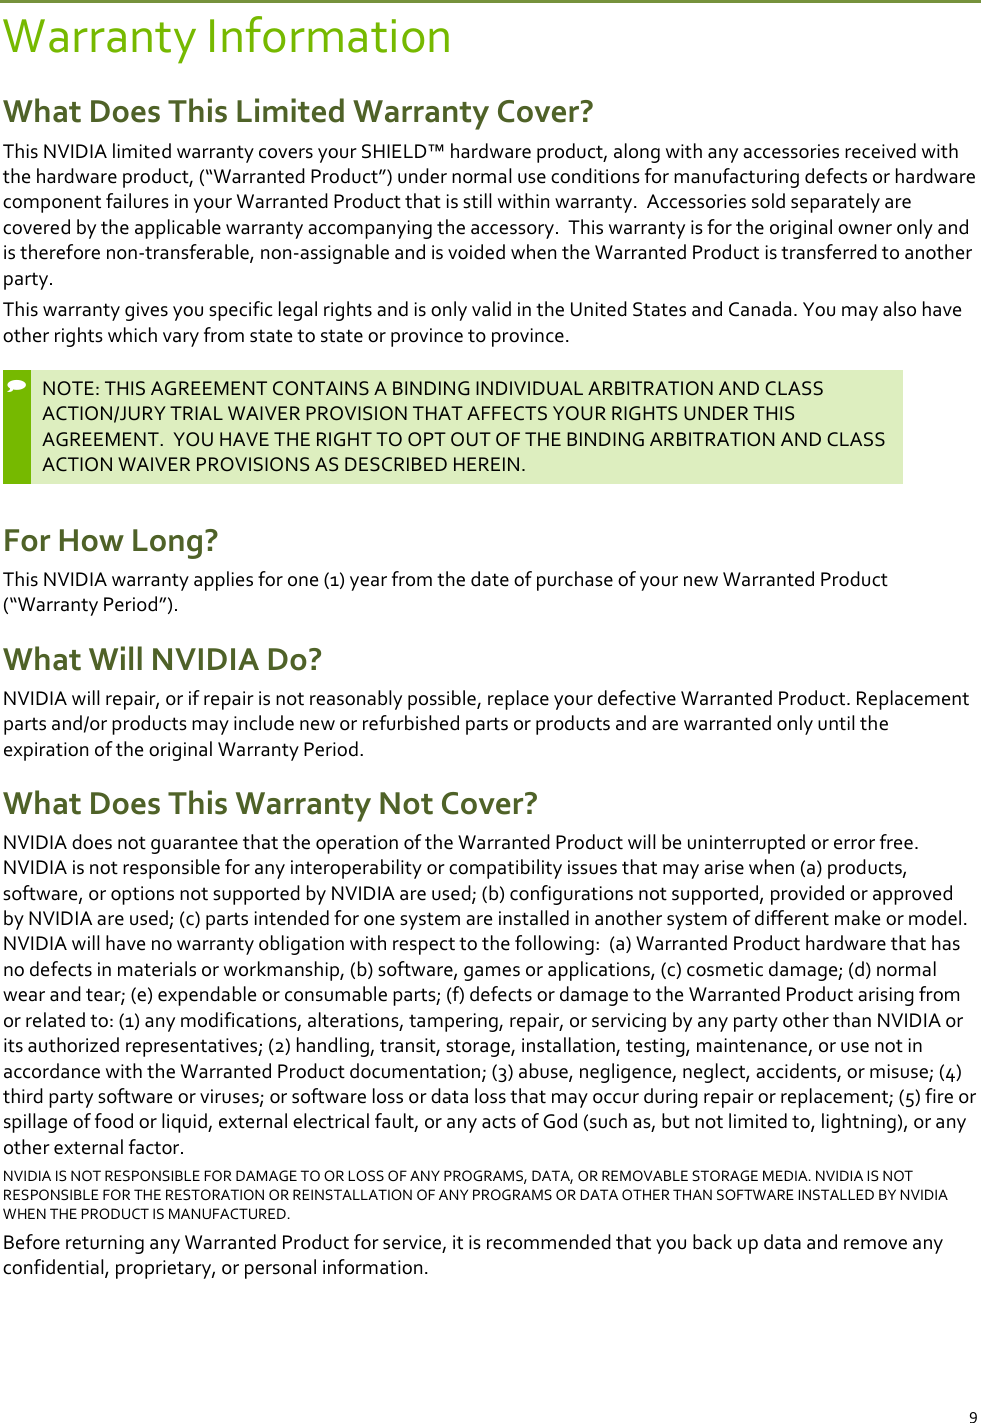 9 Warranty Information What Does This Limited Warranty Cover? This NVIDIA limited warranty covers your SHIELD™ hardware product, along with any accessories received with the hardware product, (“Warranted Product”) under normal use conditions for manufacturing defects or hardware component failures in your Warranted Product that is still within warranty.  Accessories sold separately are covered by the applicable warranty accompanying the accessory.  This warranty is for the original owner only and is therefore non-transferable, non-assignable and is voided when the Warranted Product is transferred to another party.   This warranty gives you specific legal rights and is only valid in the United States and Canada. You may also have other rights which vary from state to state or province to province.   NOTE: THIS AGREEMENT CONTAINS A BINDING INDIVIDUAL ARBITRATION AND CLASS ACTION/JURY TRIAL WAIVER PROVISION THAT AFFECTS YOUR RIGHTS UNDER THIS AGREEMENT.  YOU HAVE THE RIGHT TO OPT OUT OF THE BINDING ARBITRATION AND CLASS ACTION WAIVER PROVISIONS AS DESCRIBED HEREIN.  For How Long? This NVIDIA warranty applies for one (1) year from the date of purchase of your new Warranted Product (“Warranty Period”).  What Will NVIDIA Do? NVIDIA will repair, or if repair is not reasonably possible, replace your defective Warranted Product. Replacement parts and/or products may include new or refurbished parts or products and are warranted only until the expiration of the original Warranty Period.  What Does This Warranty Not Cover? NVIDIA does not guarantee that the operation of the Warranted Product will be uninterrupted or error free. NVIDIA is not responsible for any interoperability or compatibility issues that may arise when (a) products, software, or options not supported by NVIDIA are used; (b) configurations not supported, provided or approved by NVIDIA are used; (c) parts intended for one system are installed in another system of different make or model.  NVIDIA will have no warranty obligation with respect to the following:  (a) Warranted Product hardware that has no defects in materials or workmanship, (b) software, games or applications, (c) cosmetic damage; (d) normal wear and tear; (e) expendable or consumable parts; (f) defects or damage to the Warranted Product arising from or related to: (1) any modifications, alterations, tampering, repair, or servicing by any party other than NVIDIA or its authorized representatives; (2) handling, transit, storage, installation, testing, maintenance, or use not in accordance with the Warranted Product documentation; (3) abuse, negligence, neglect, accidents, or misuse; (4) third party software or viruses; or software loss or data loss that may occur during repair or replacement; (5) fire or spillage of food or liquid, external electrical fault, or any acts of God (such as, but not limited to, lightning), or any other external factor. NVIDIA IS NOT RESPONSIBLE FOR DAMAGE TO OR LOSS OF ANY PROGRAMS, DATA, OR REMOVABLE STORAGE MEDIA. NVIDIA IS NOT RESPONSIBLE FOR THE RESTORATION OR REINSTALLATION OF ANY PROGRAMS OR DATA OTHER THAN SOFTWARE INSTALLED BY NVIDIA WHEN THE PRODUCT IS MANUFACTURED.  Before returning any Warranted Product for service, it is recommended that you back up data and remove any confidential, proprietary, or personal information.  